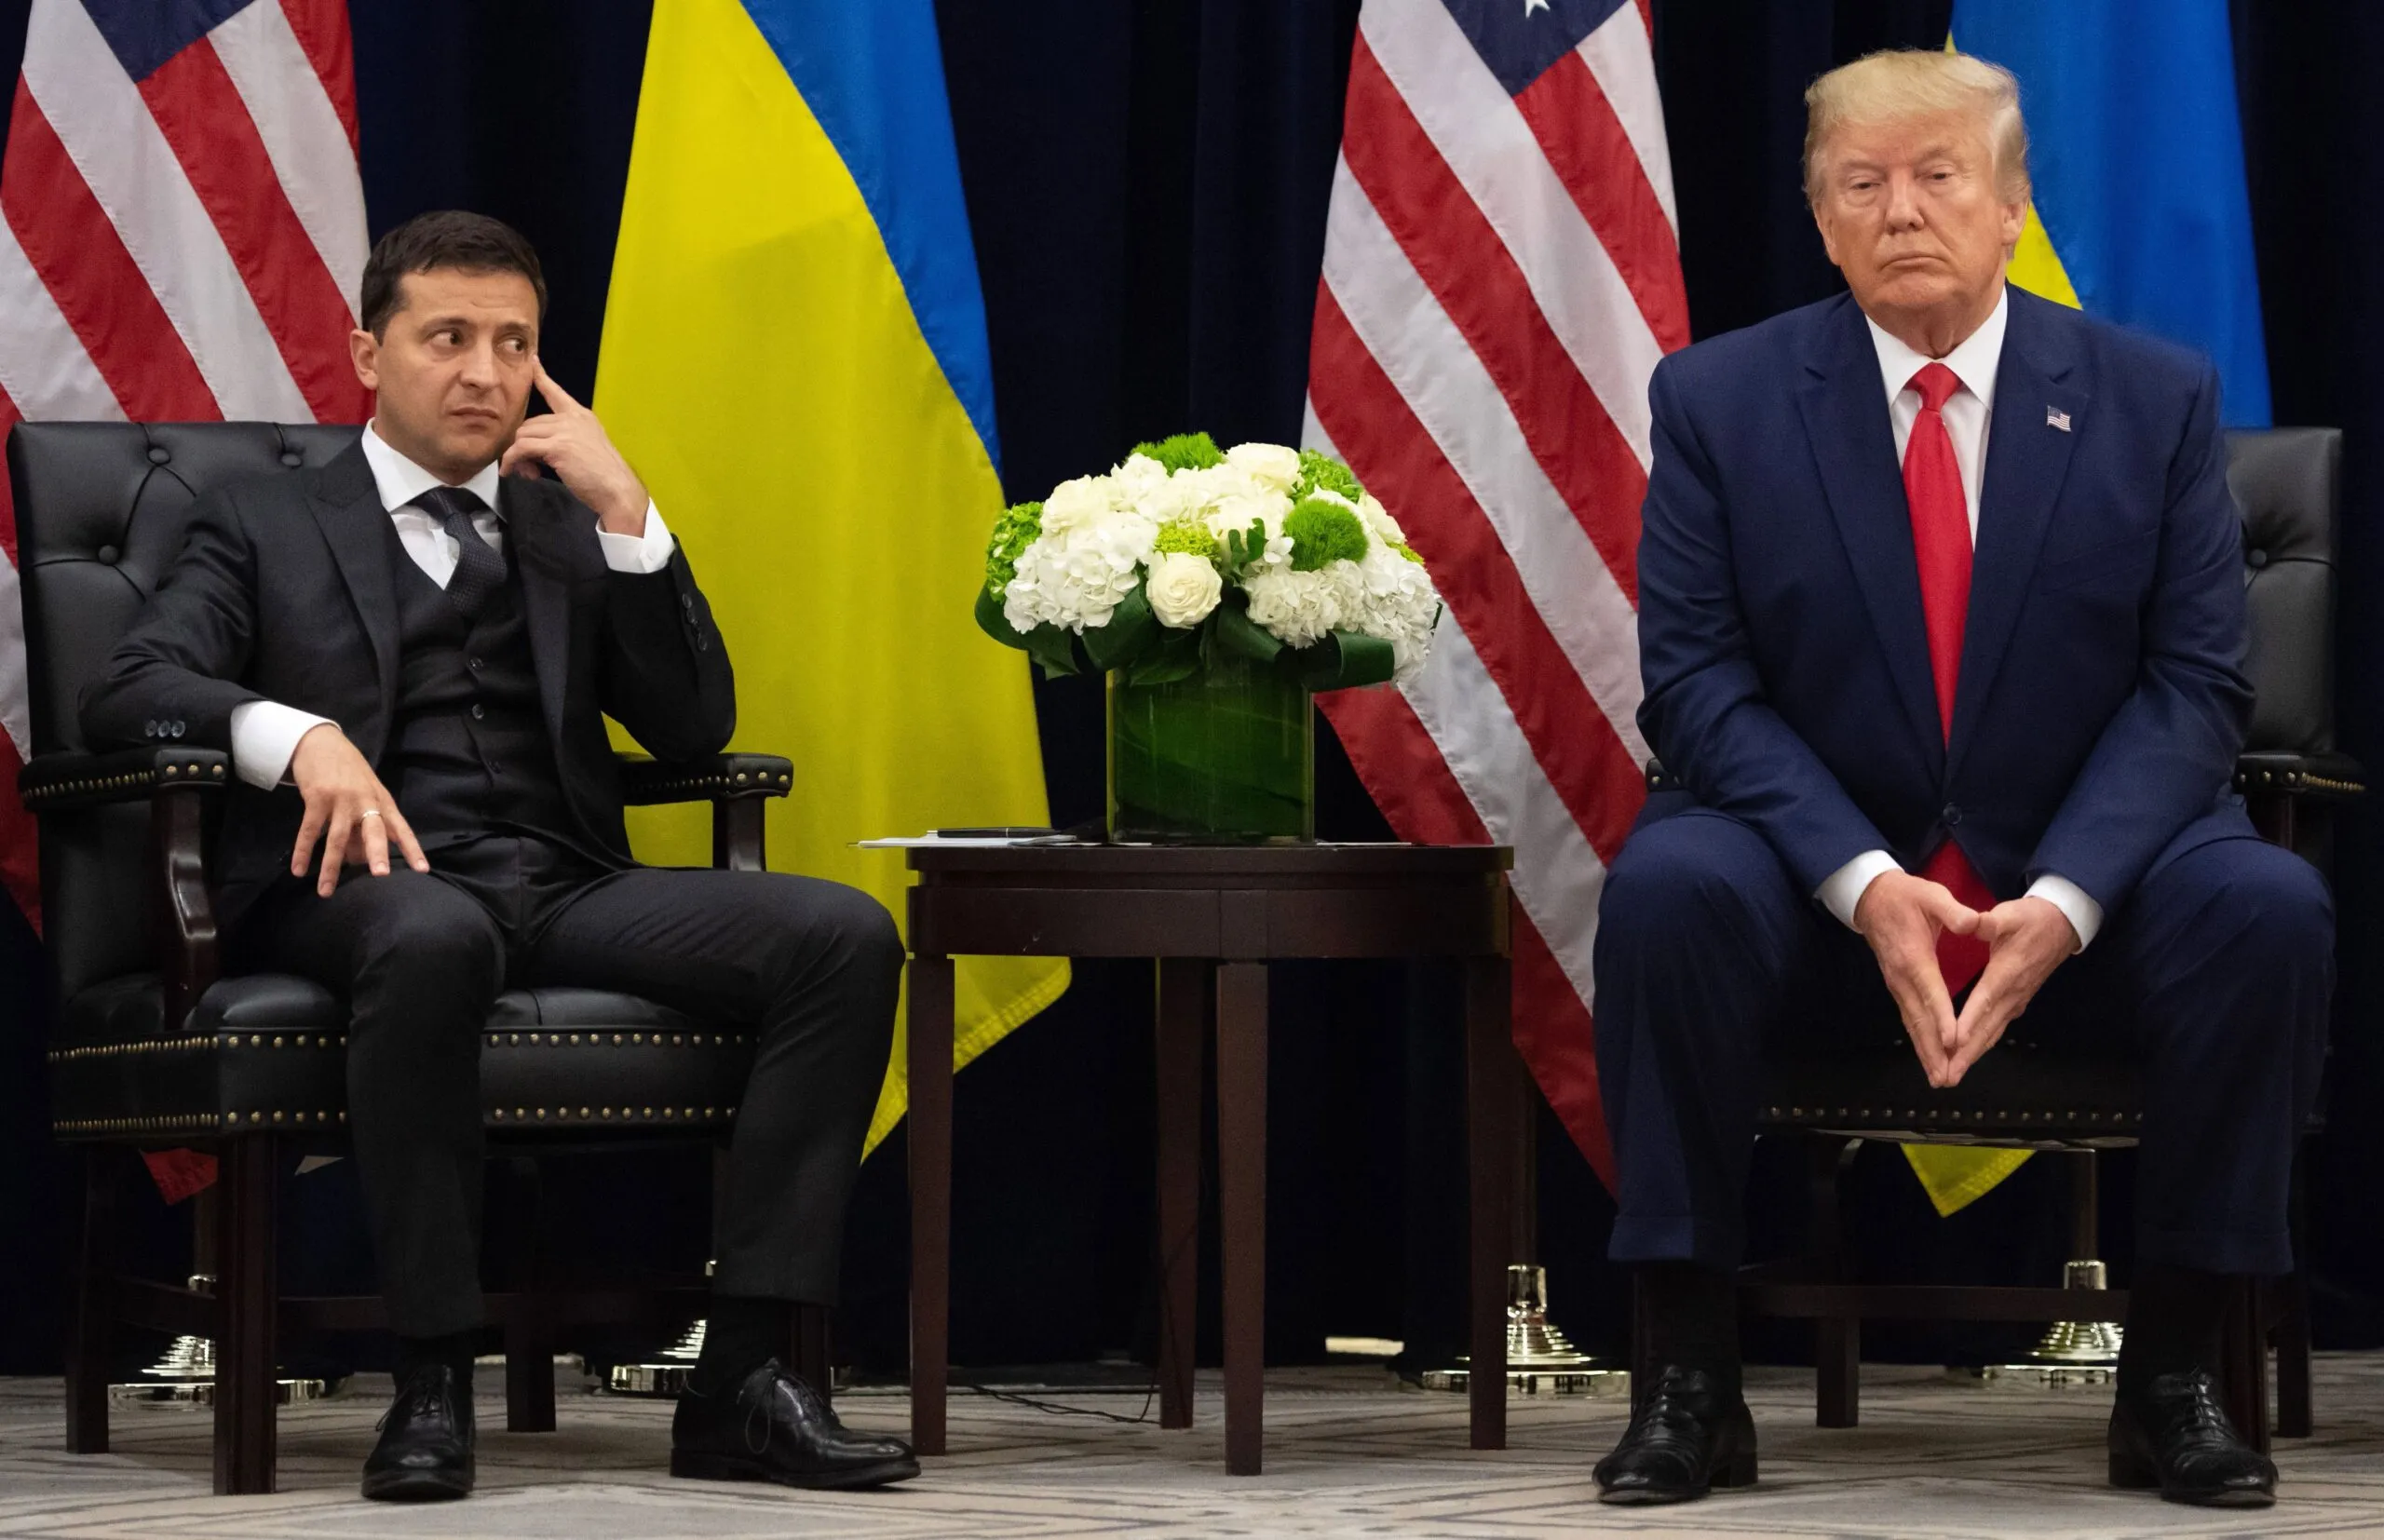 Trump Vows ‘No More Never Ending Payments to Zelensky’